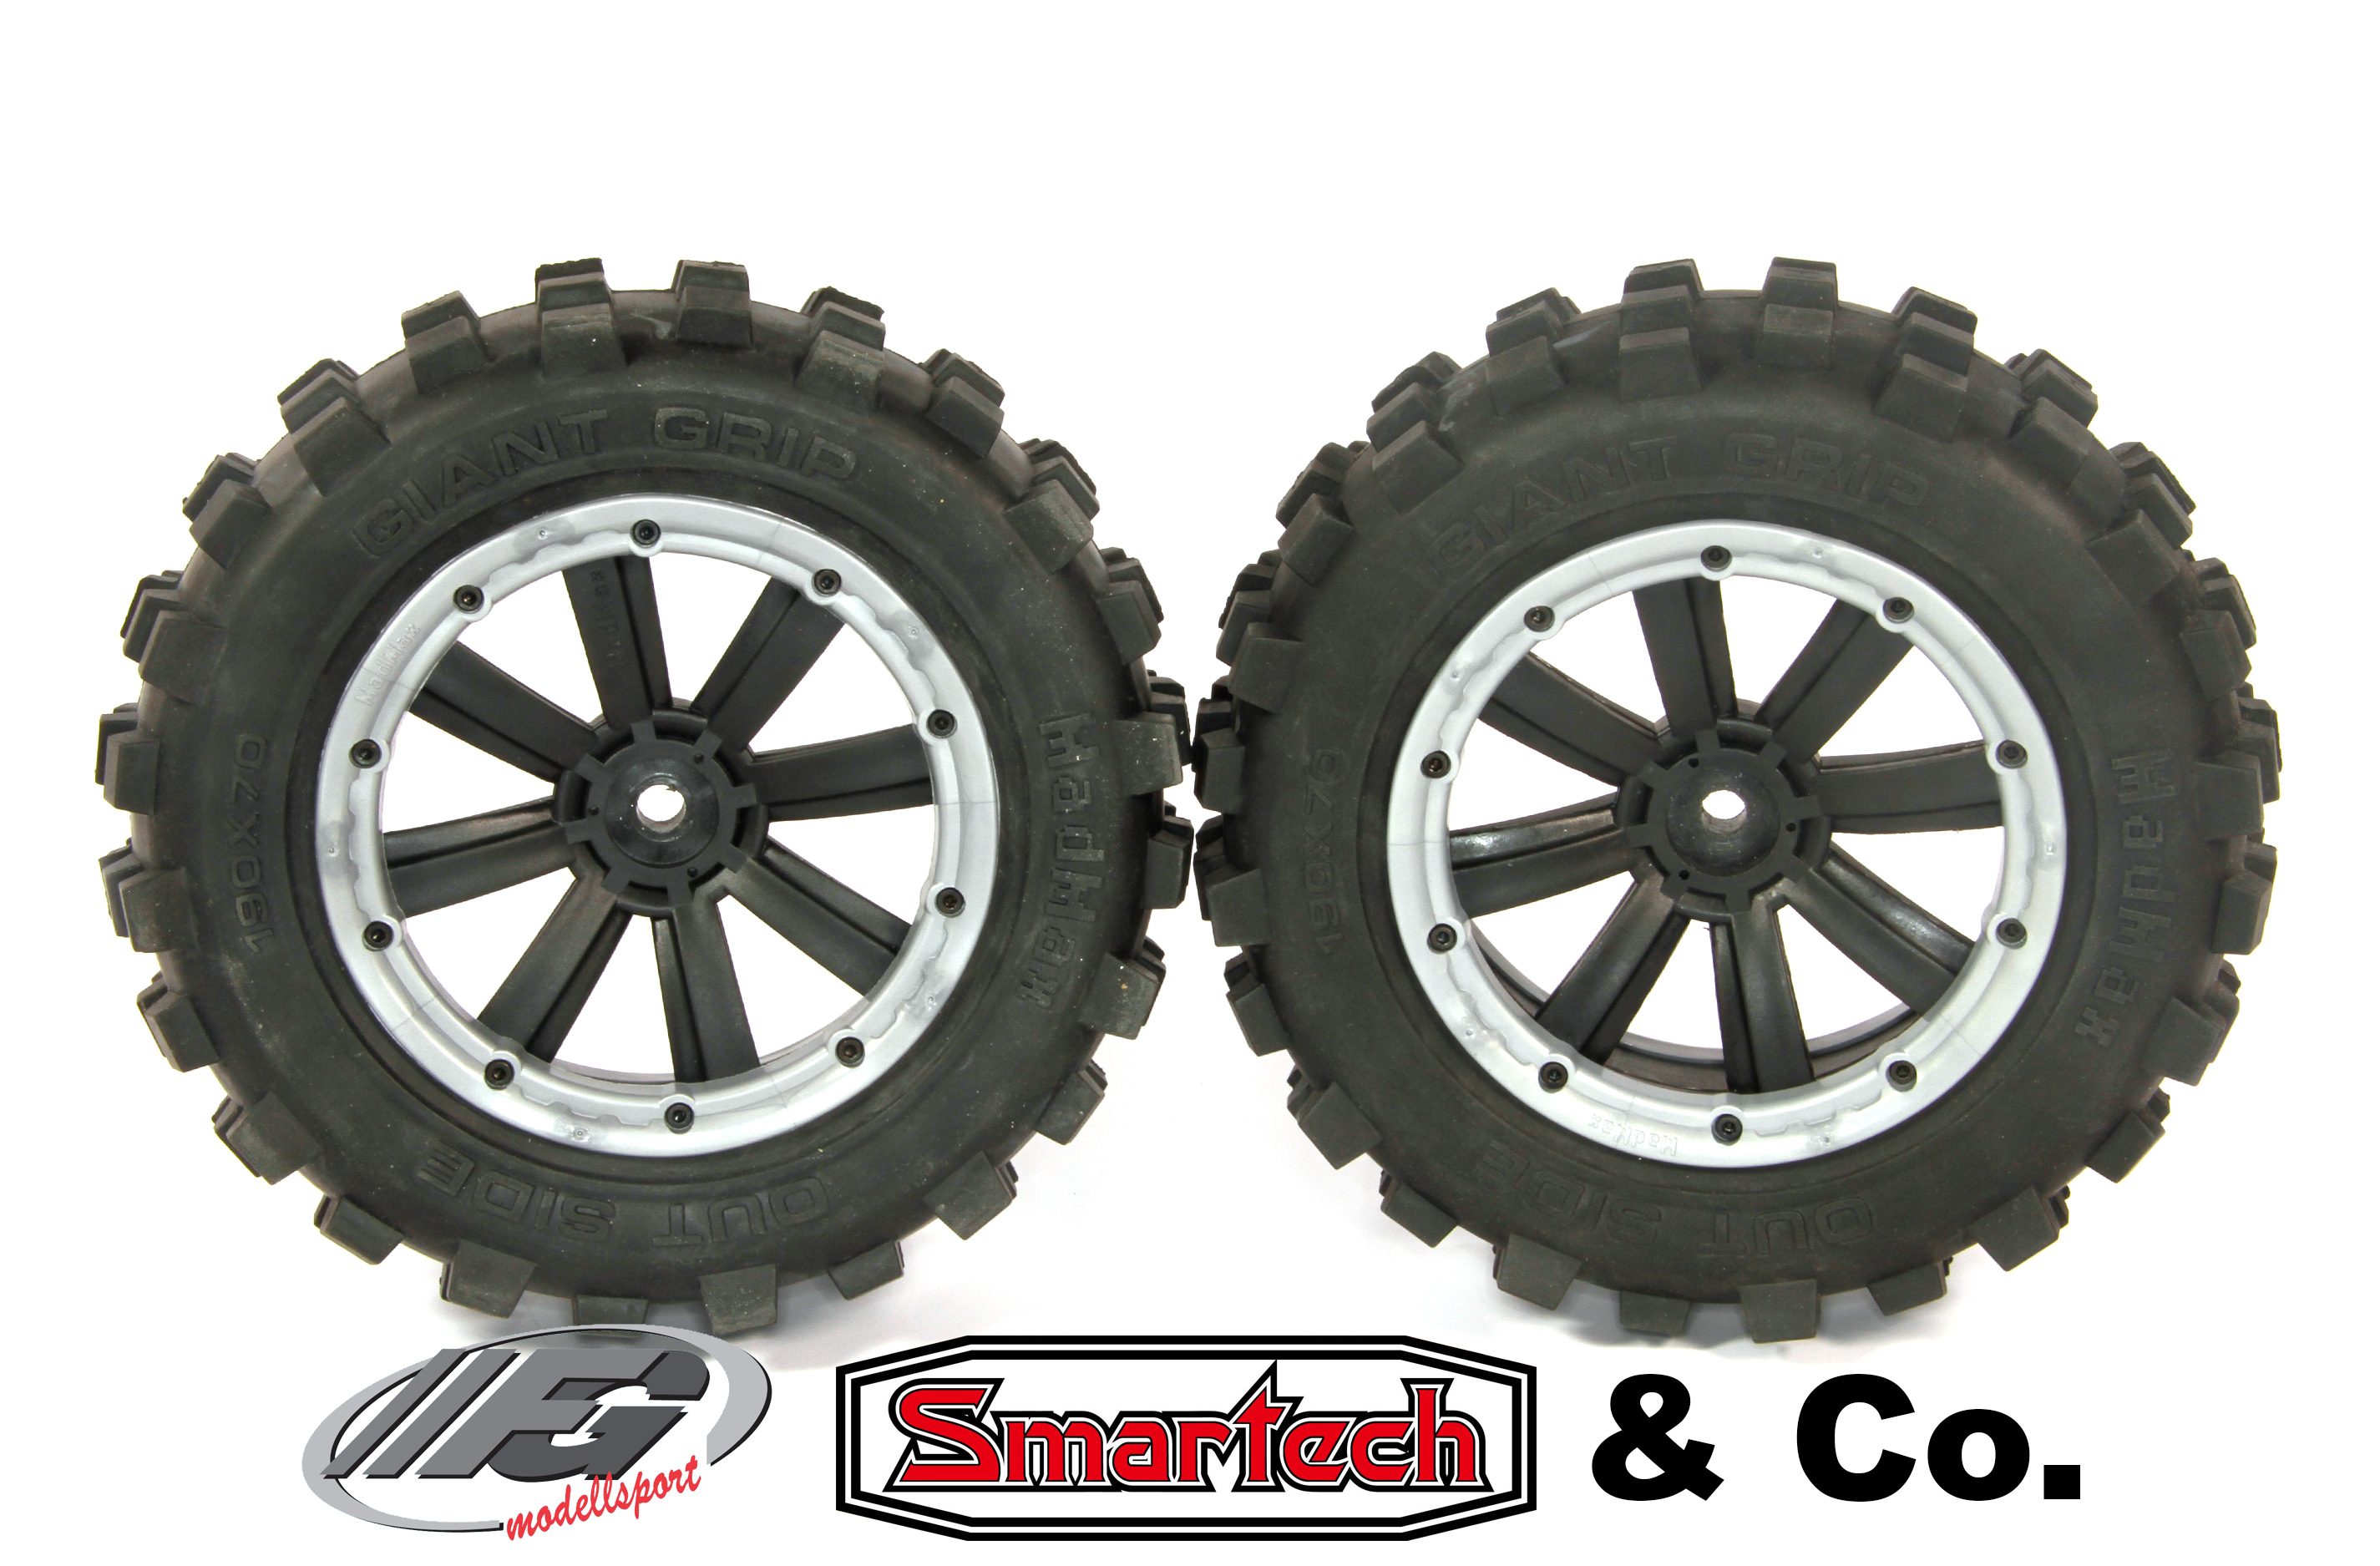 y1404/01 MadMax GIANT GRIP tires for FG/Smartech and other (18 mm square drive)